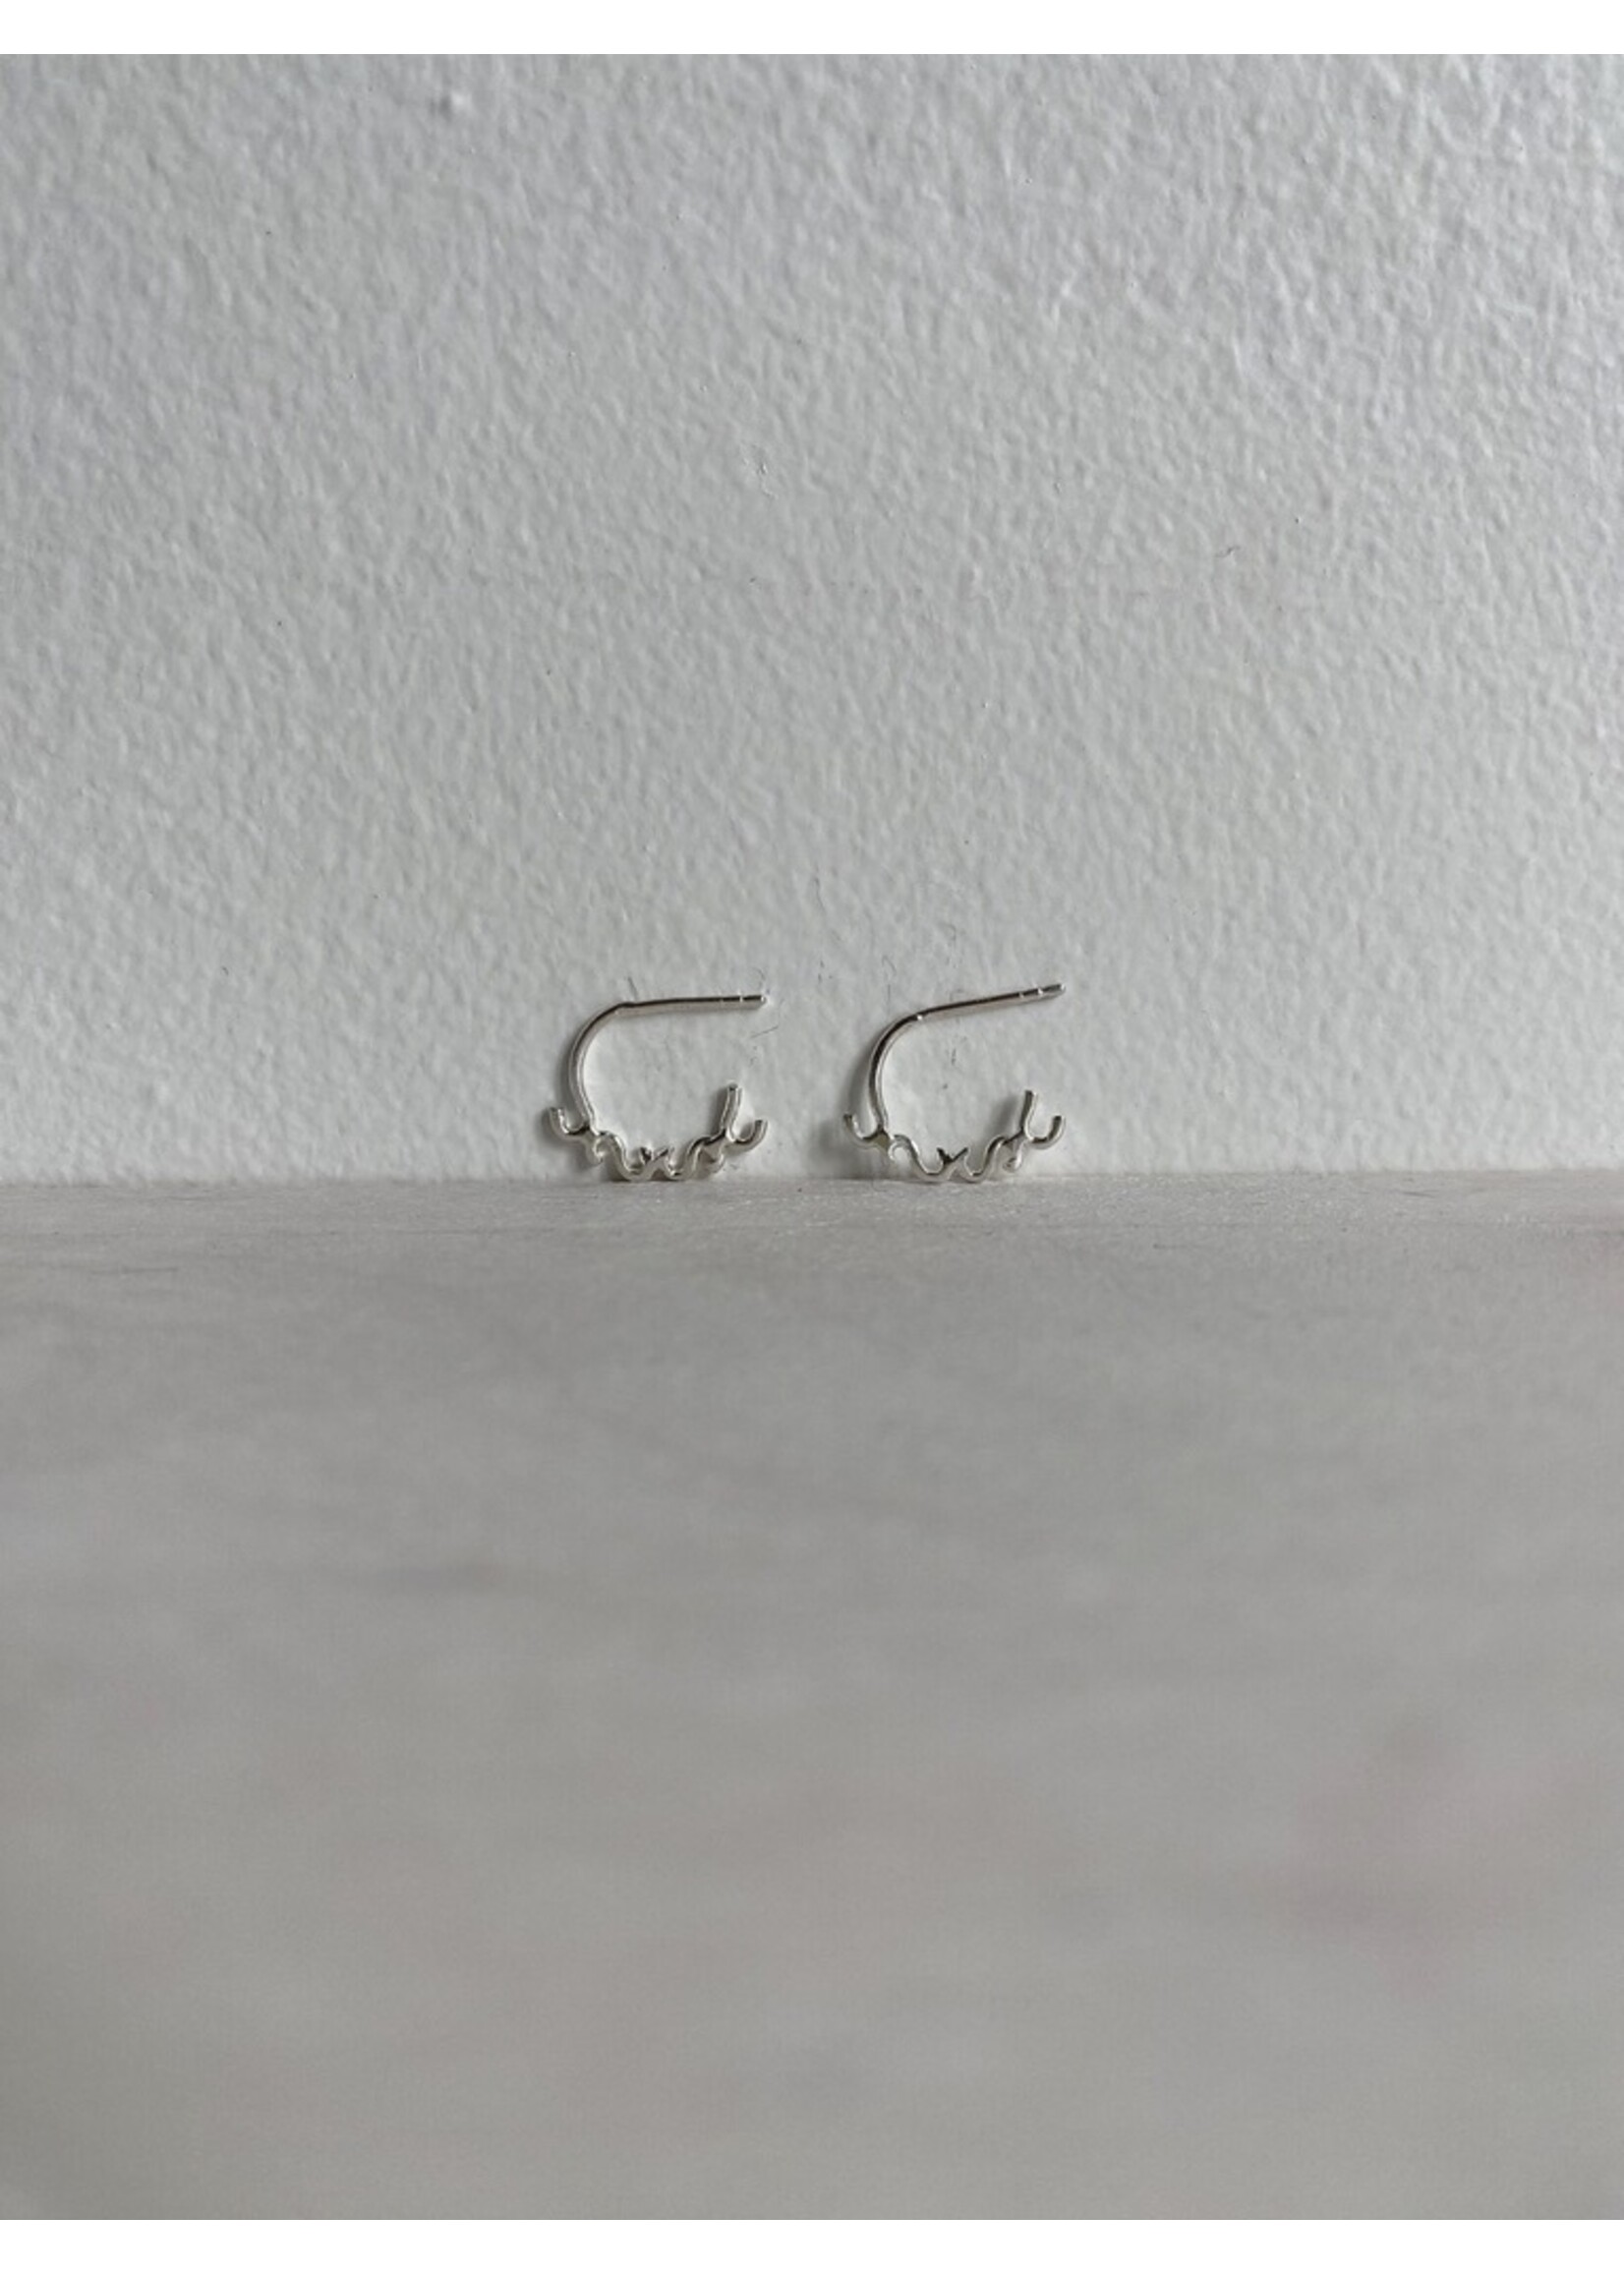 Marmo Sterling silver "Clausura" earrings by Marmo